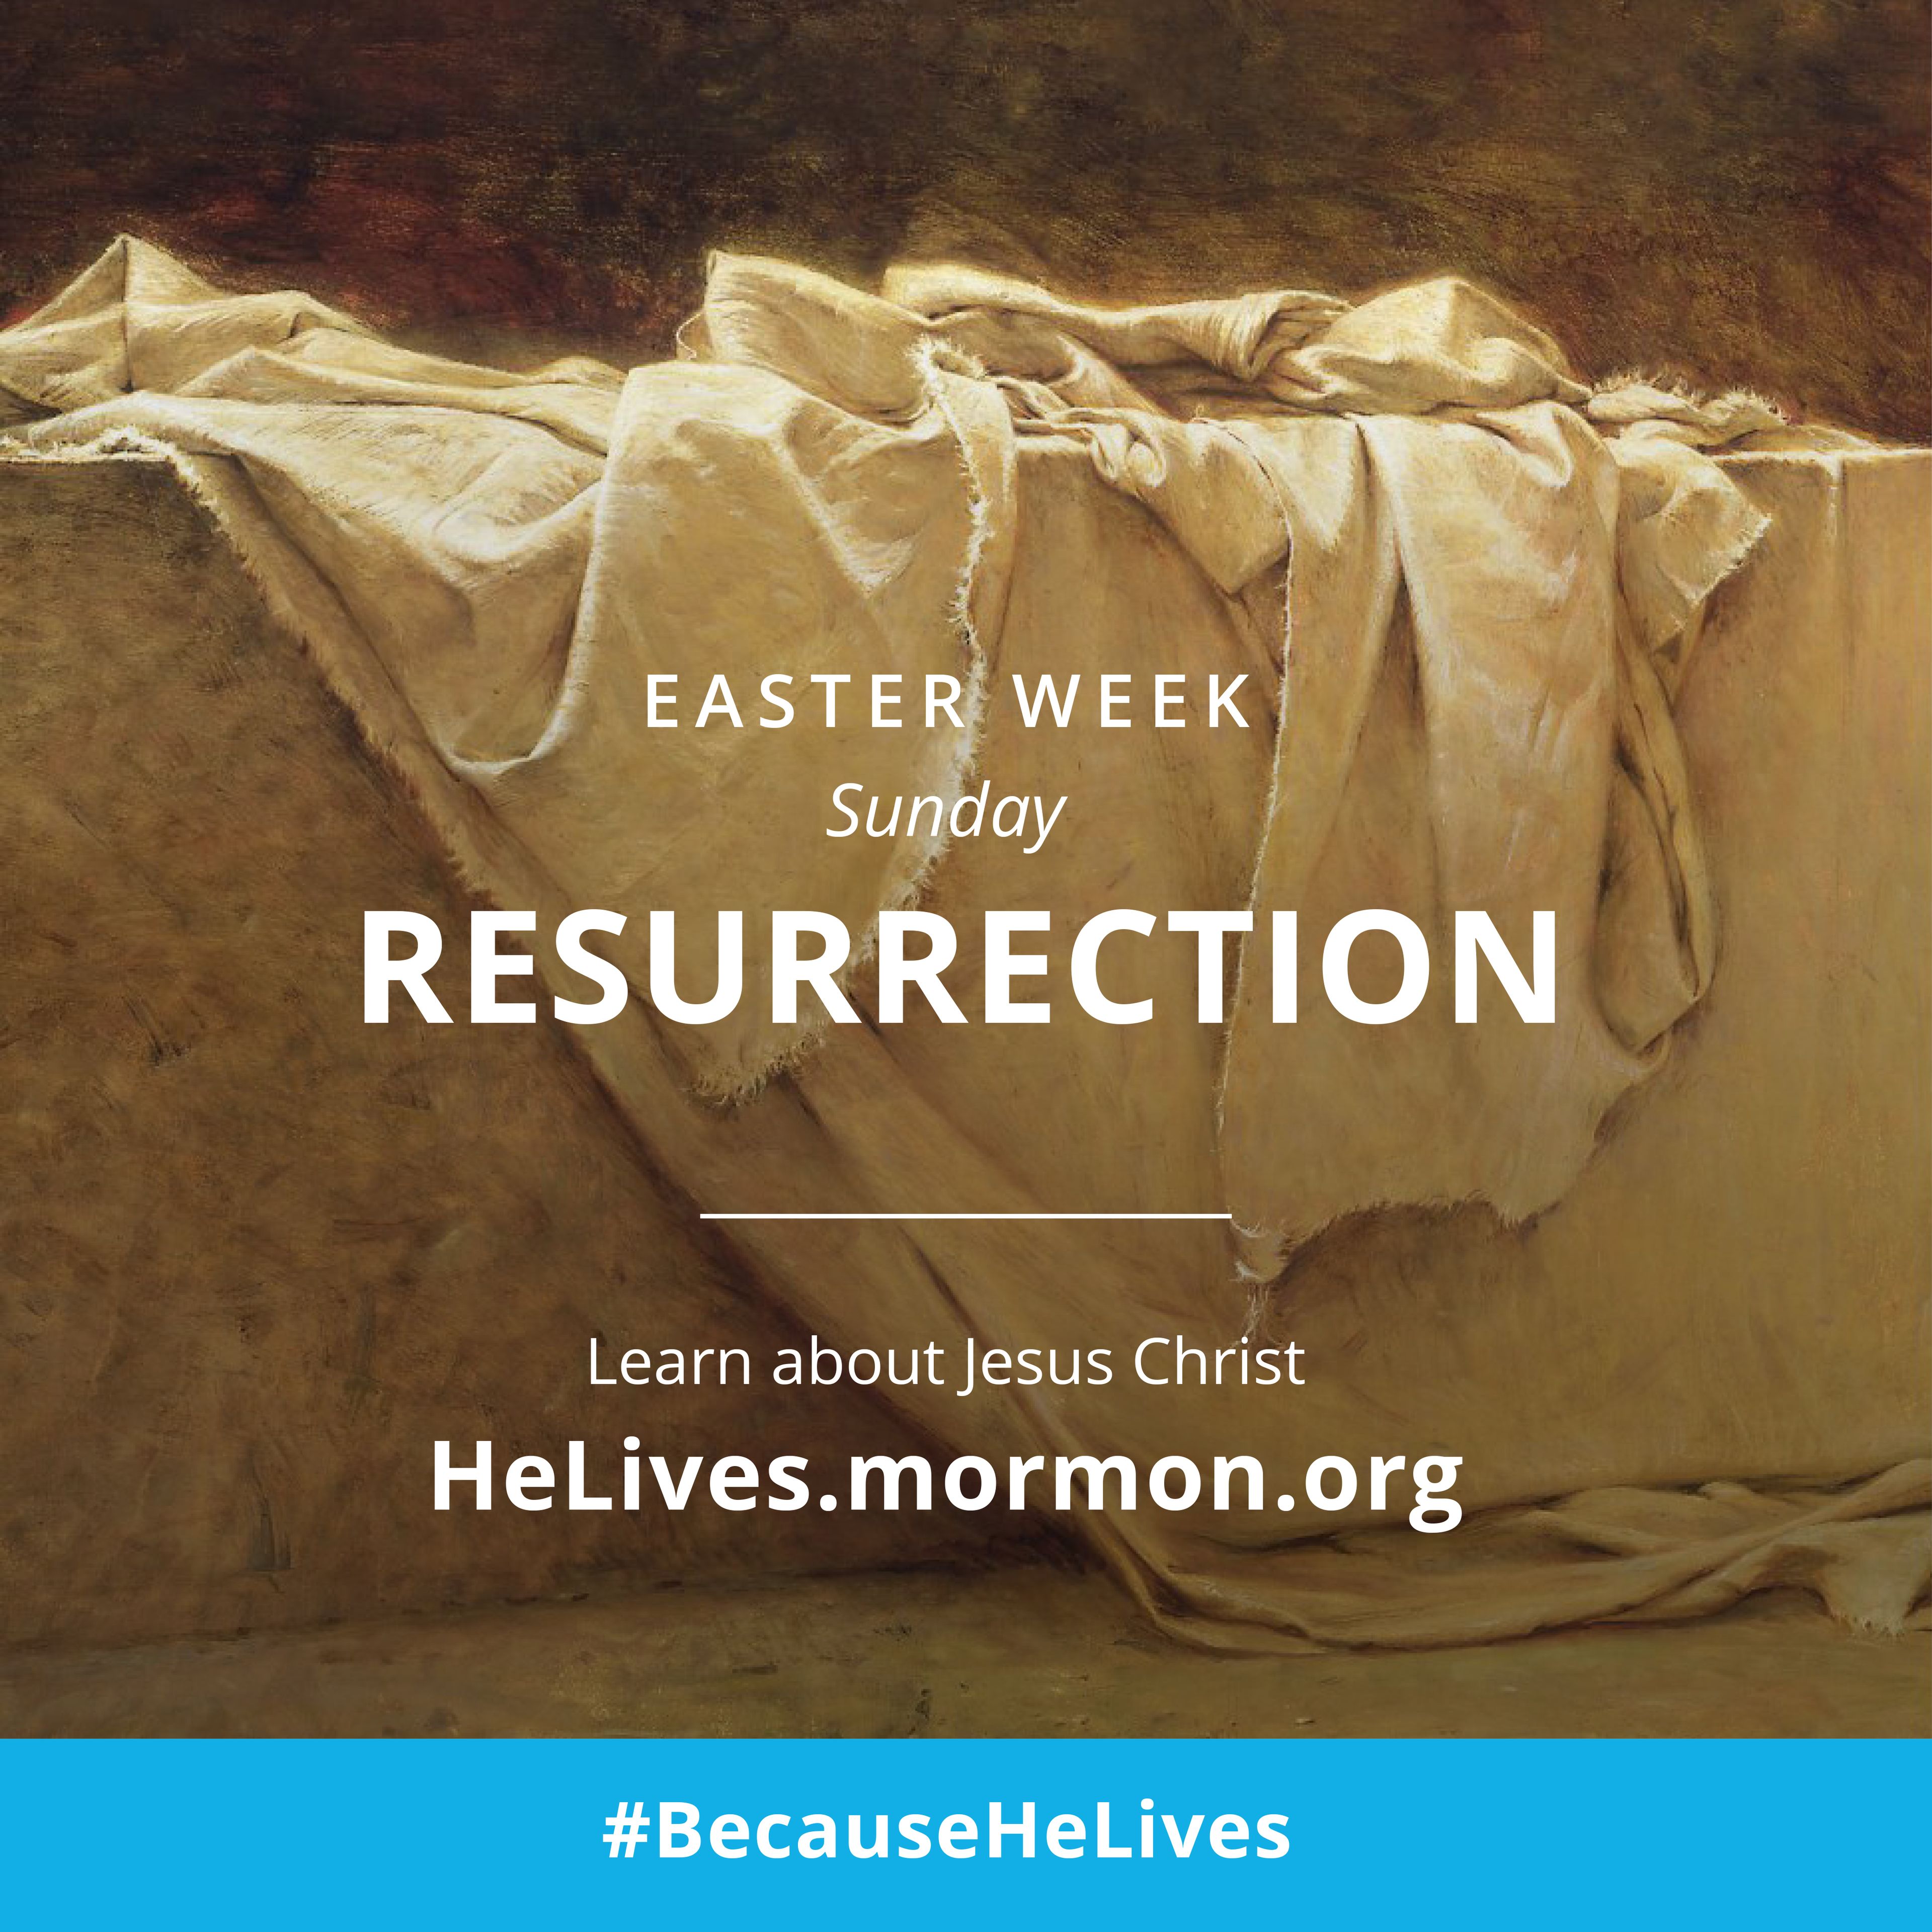 Easter week, Sunday: Resurrection. Learn about Jesus Christ. #BecauseHeLives, HeLives.mormon.org